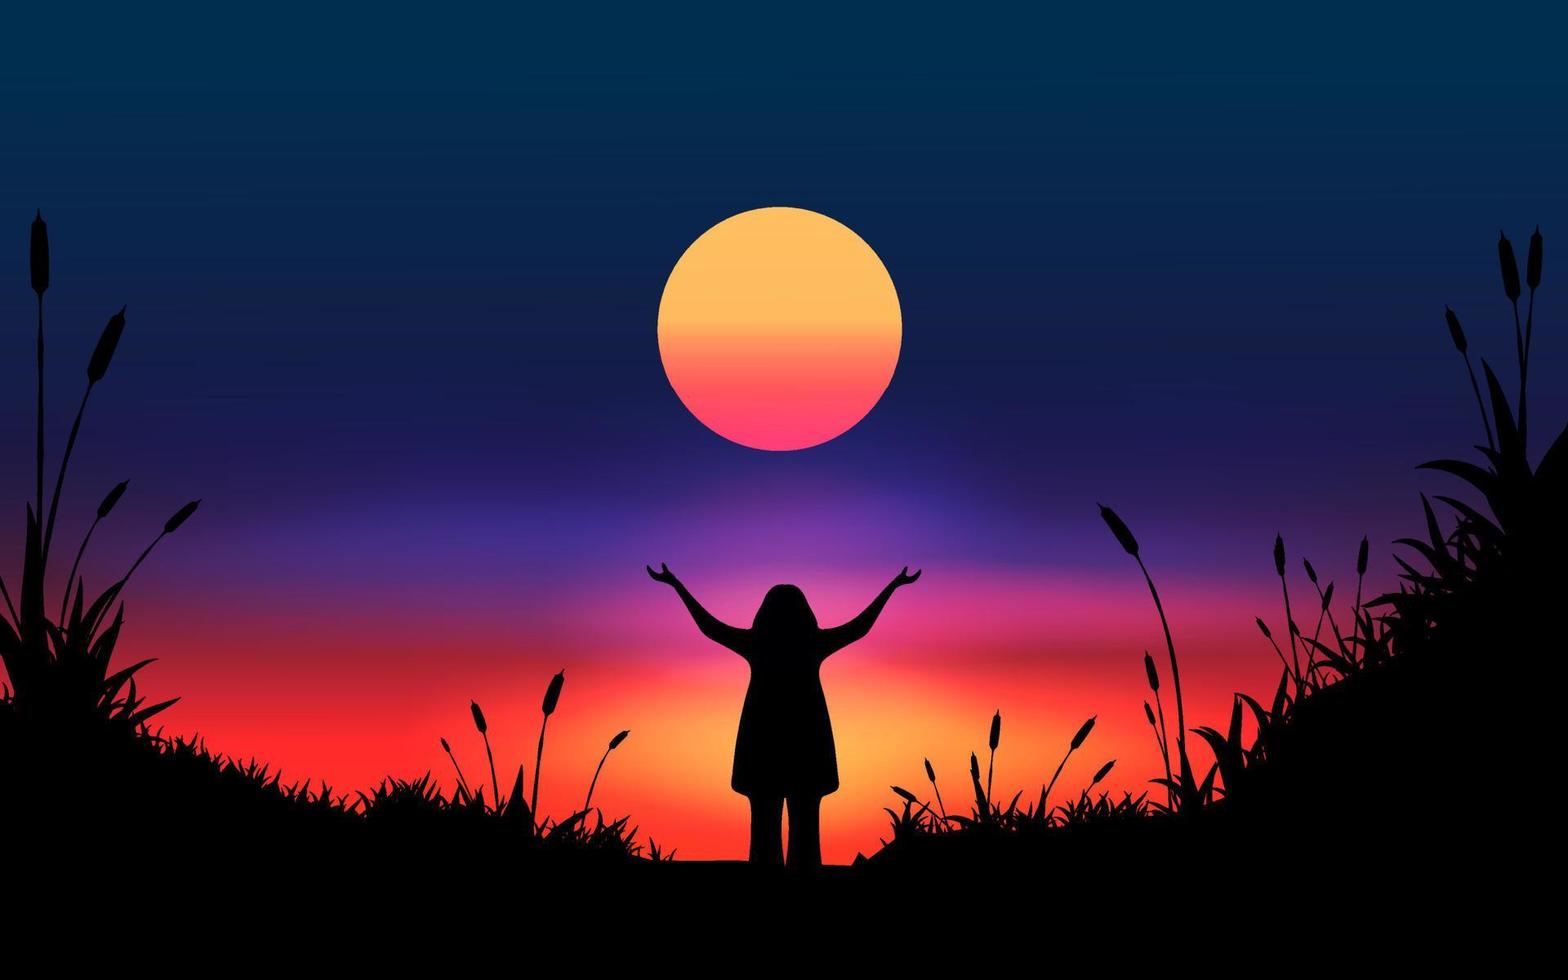 Night scene background with woman silhouette and full moon vector